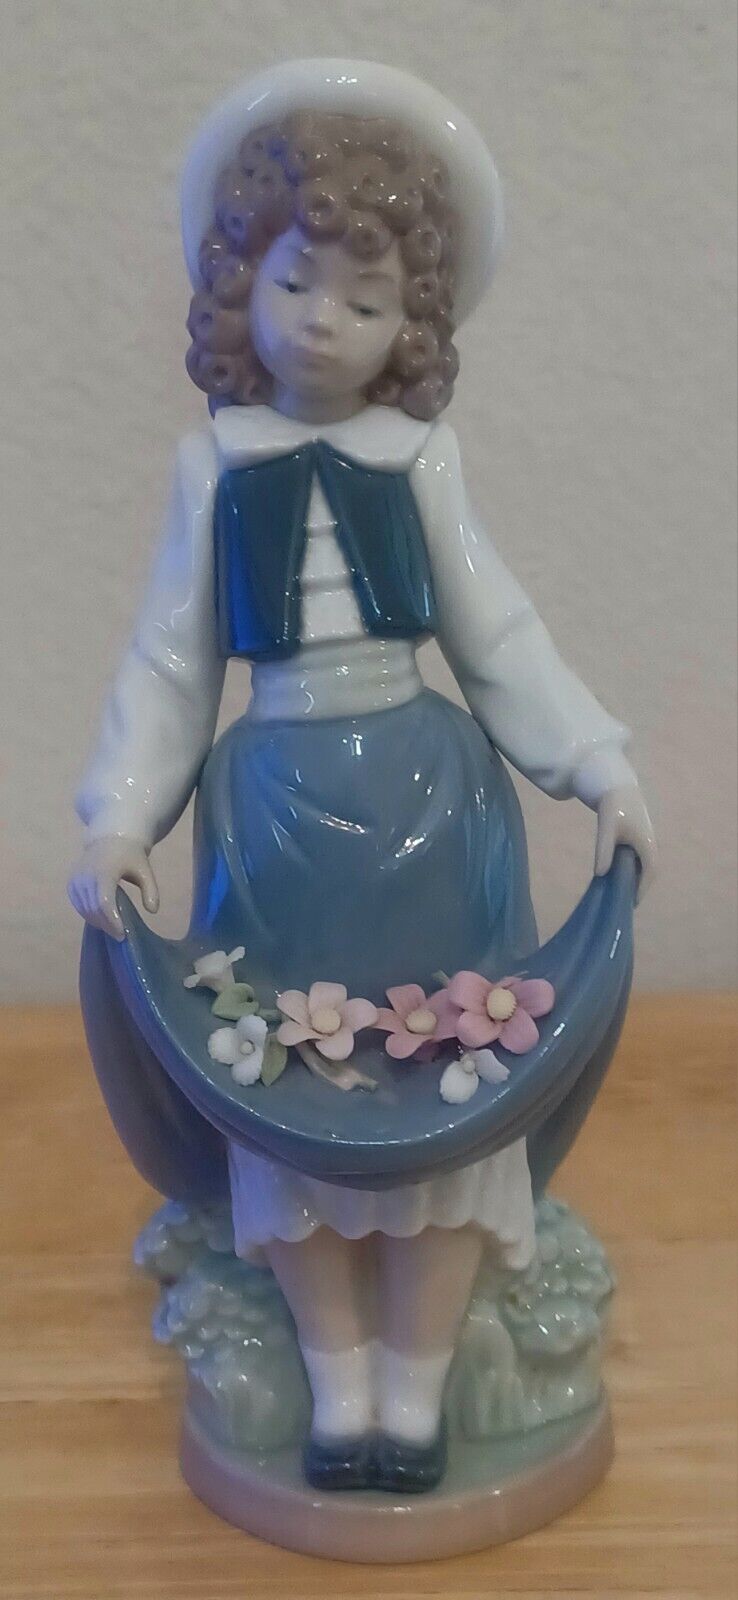 'The School Girl' Nao by Lladro #1005 Girl Holding Flowers in Her Skirt (Used)